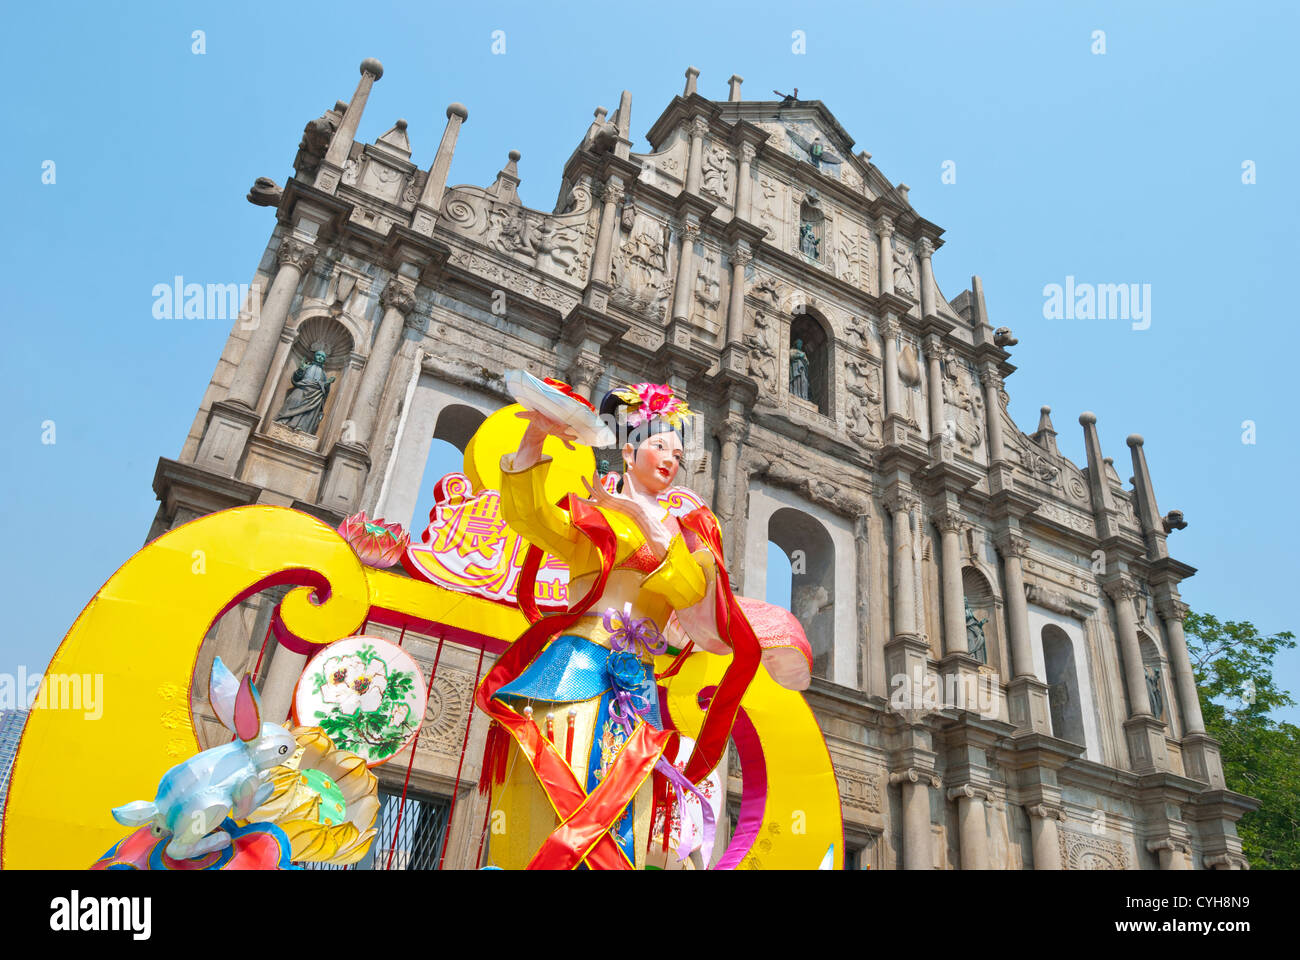 The ruins of St Paul's, Macau, with Mid-Autumn Festival decorations Stock Photo